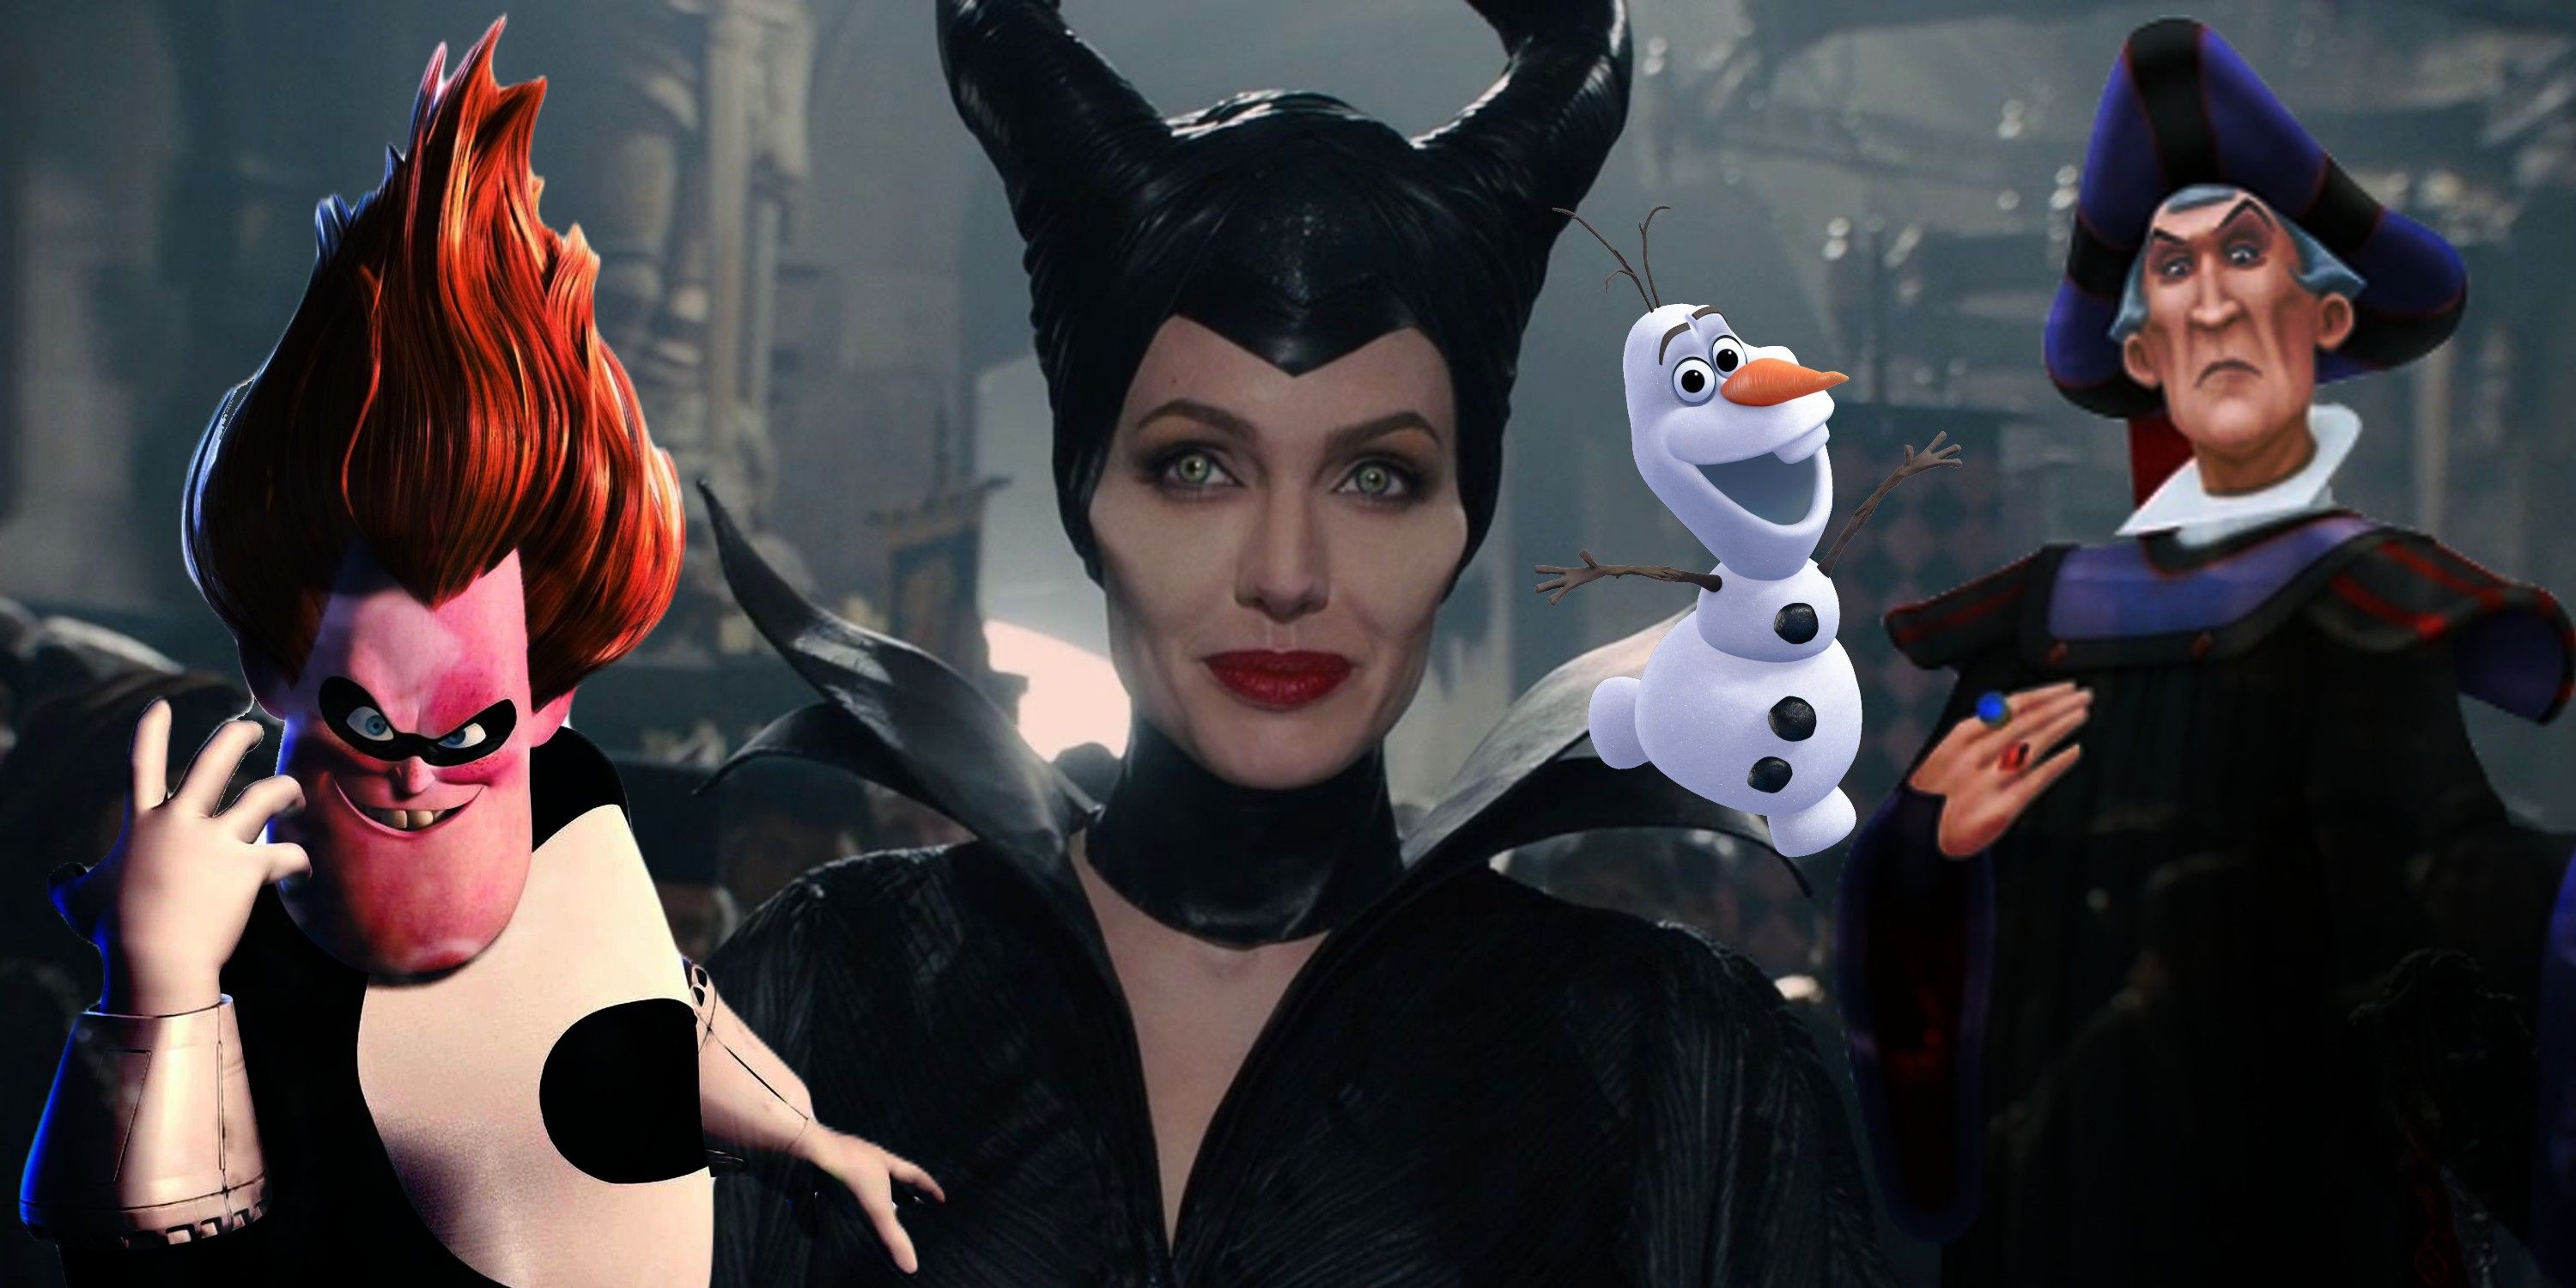 Maleficent 3: Angelina Jolie Will Reprise Title Role in Upcoming